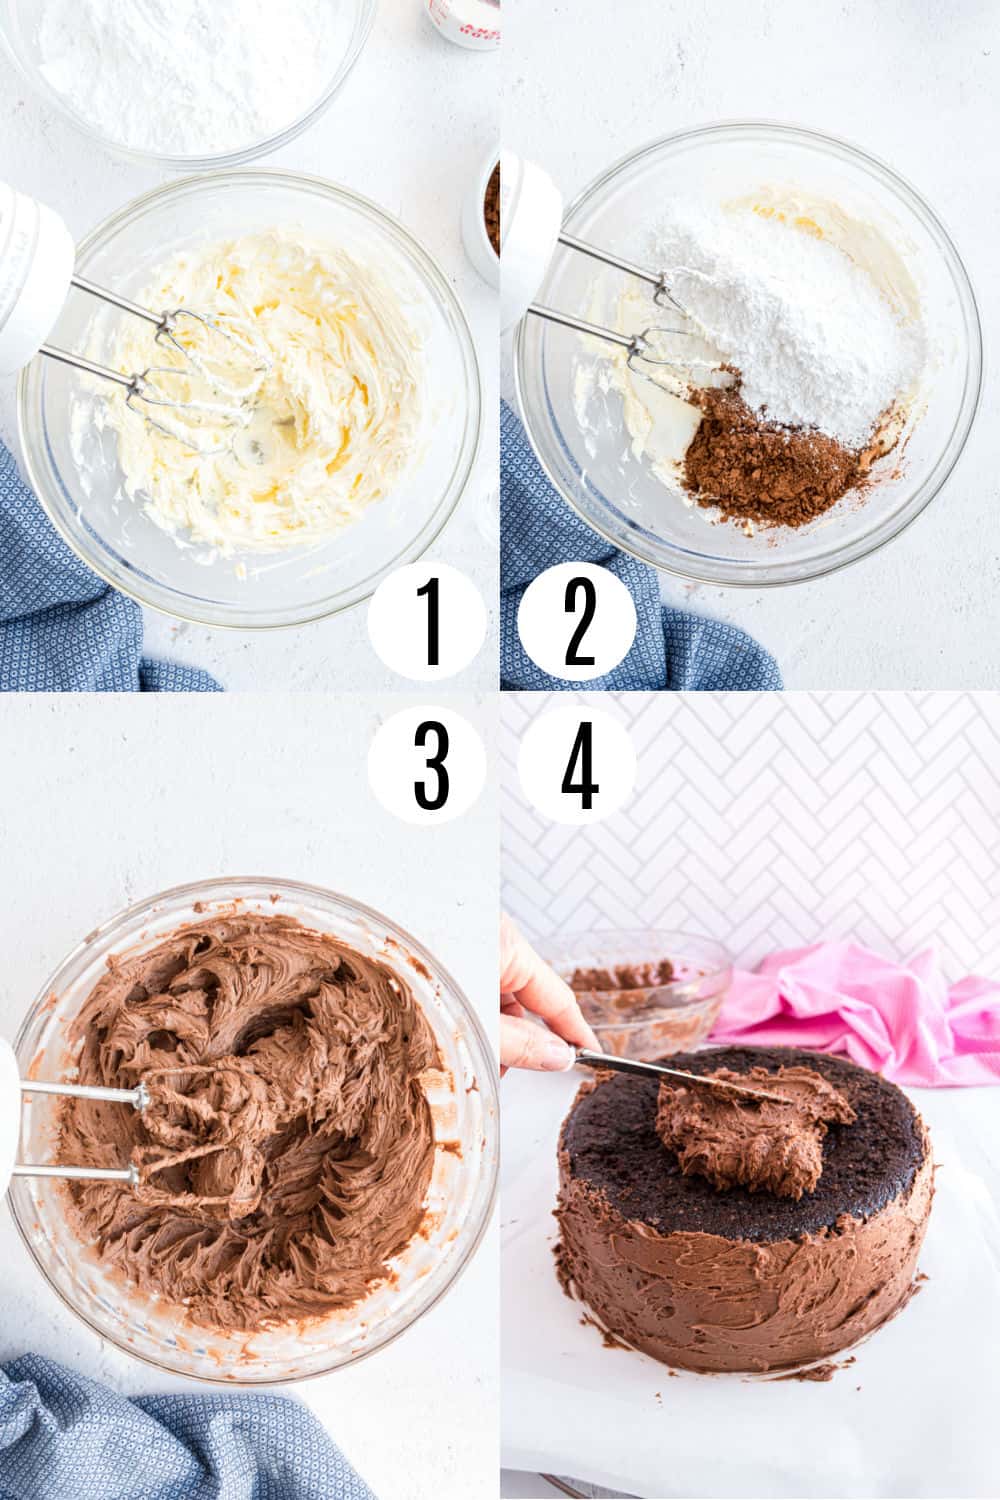 Step by step photos showing how to make chocolate buttercream frosting.